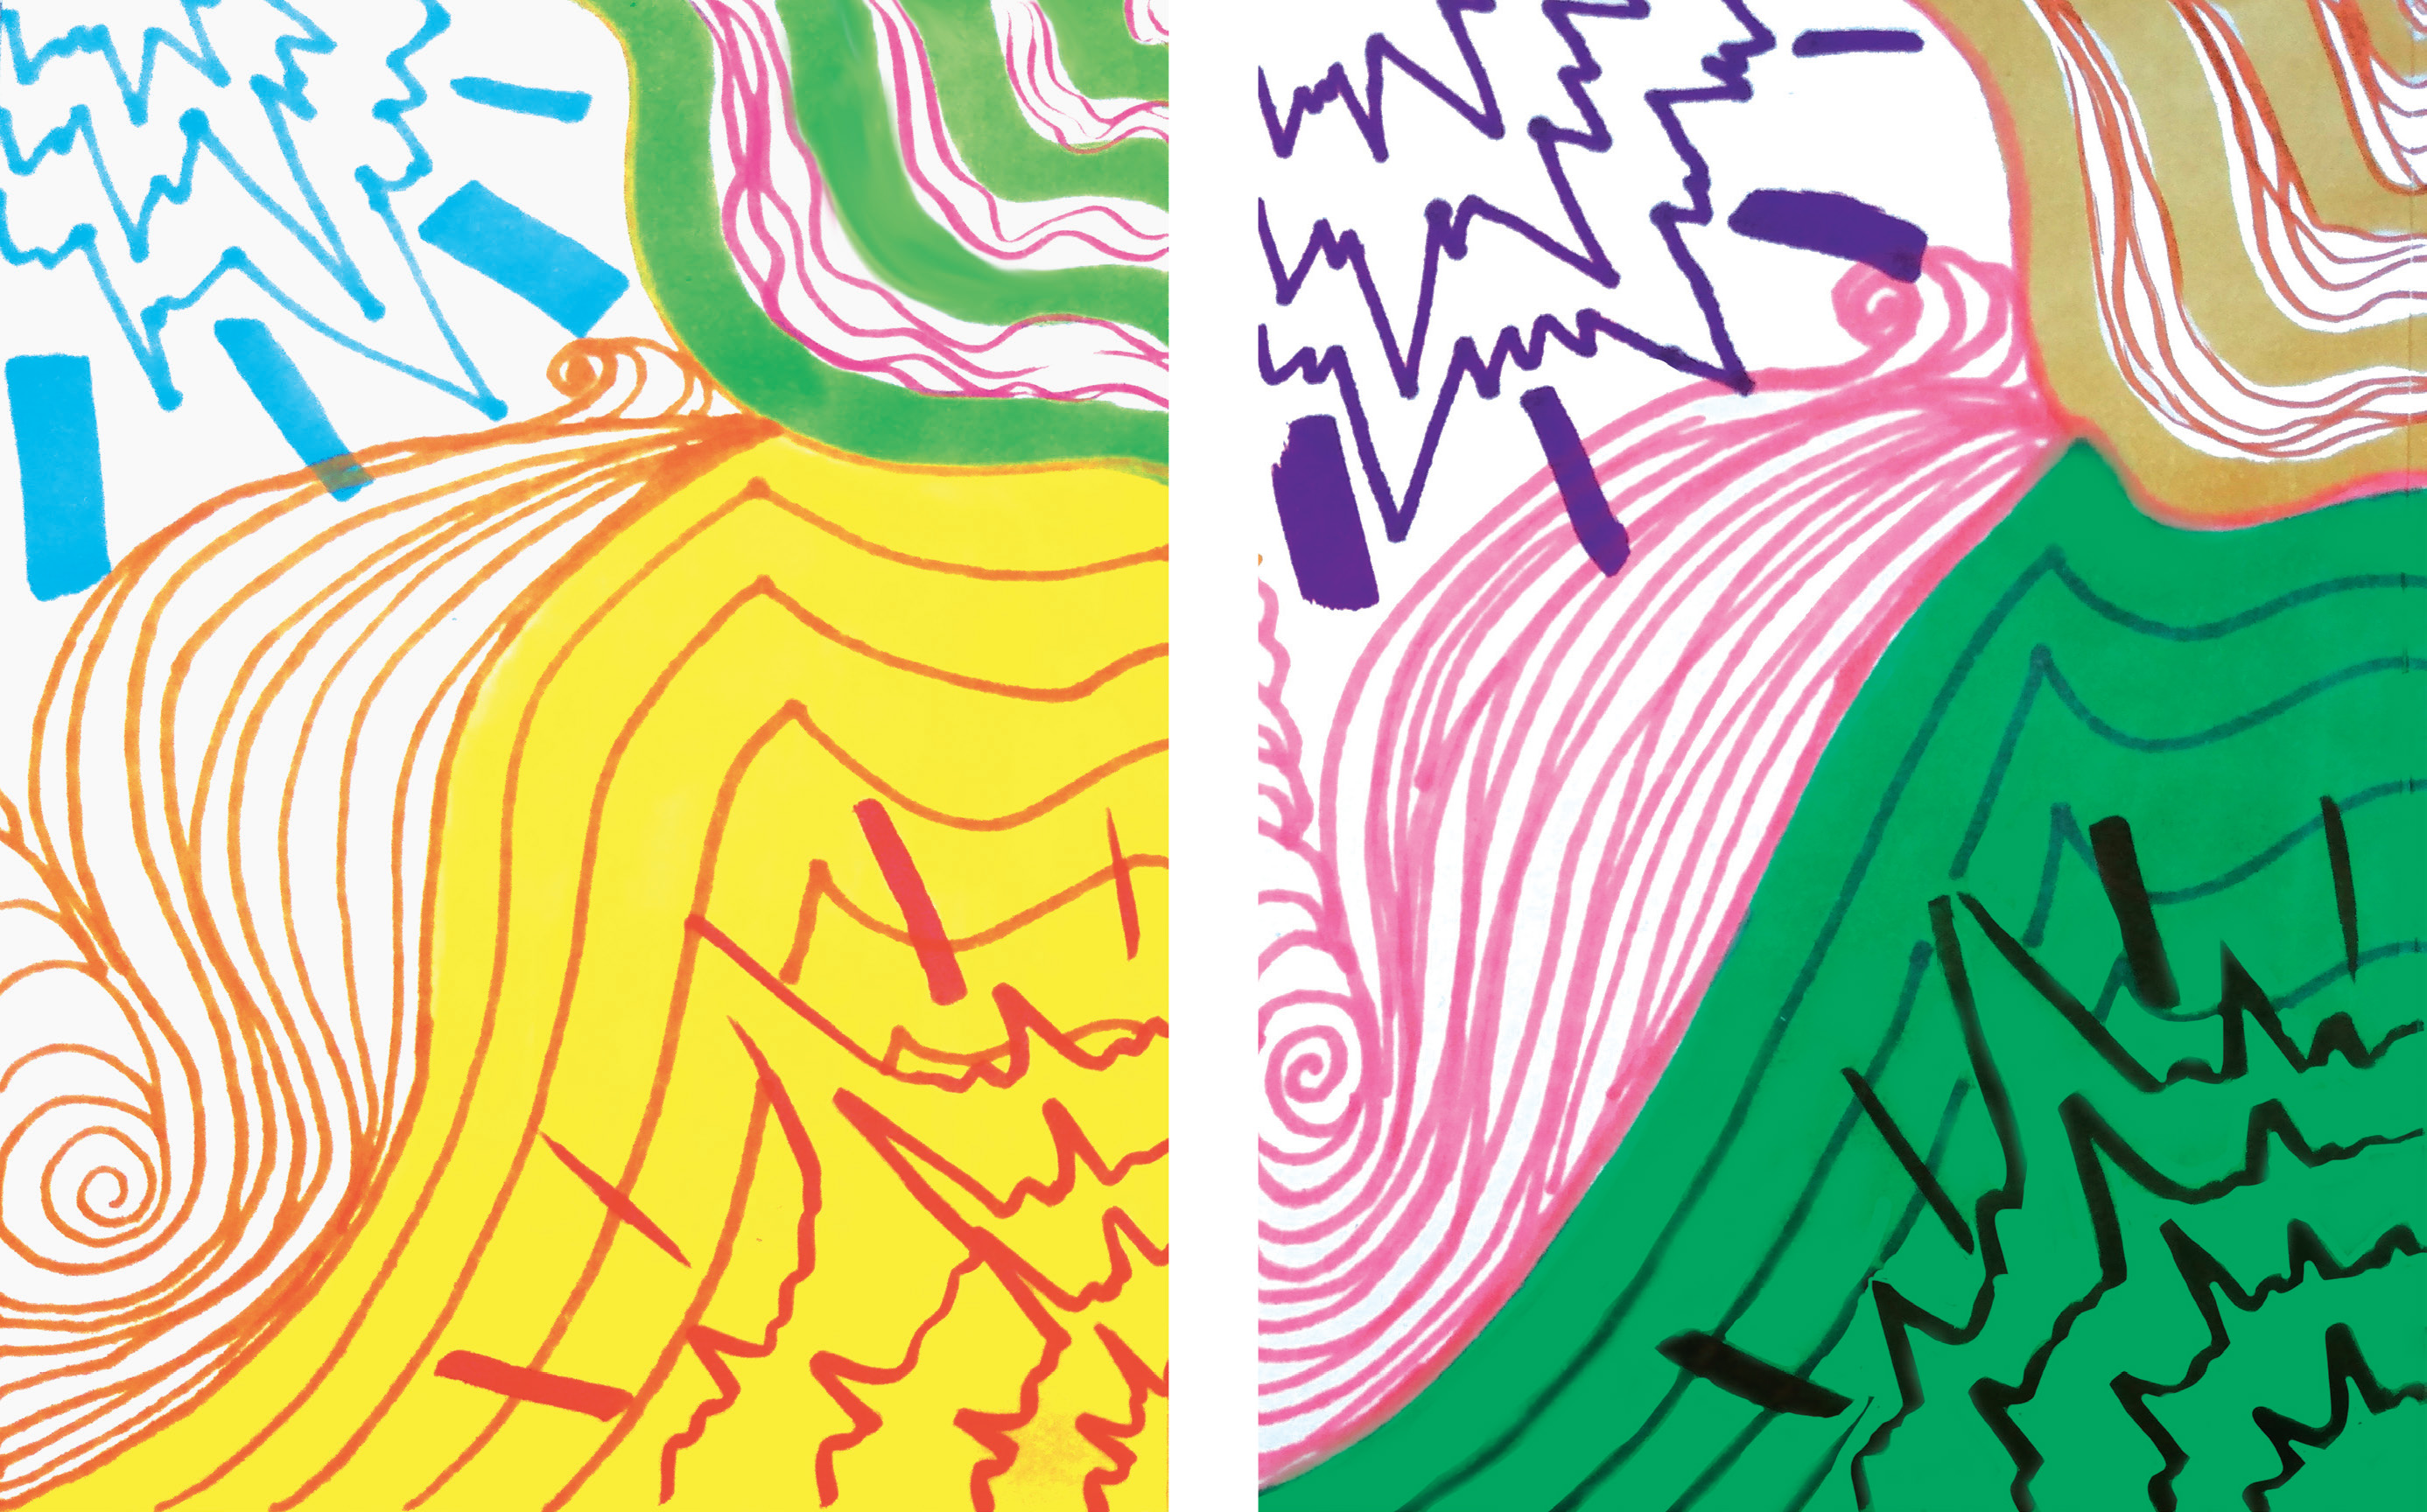 Abstract, colorful diptych by Kiera Joseph.